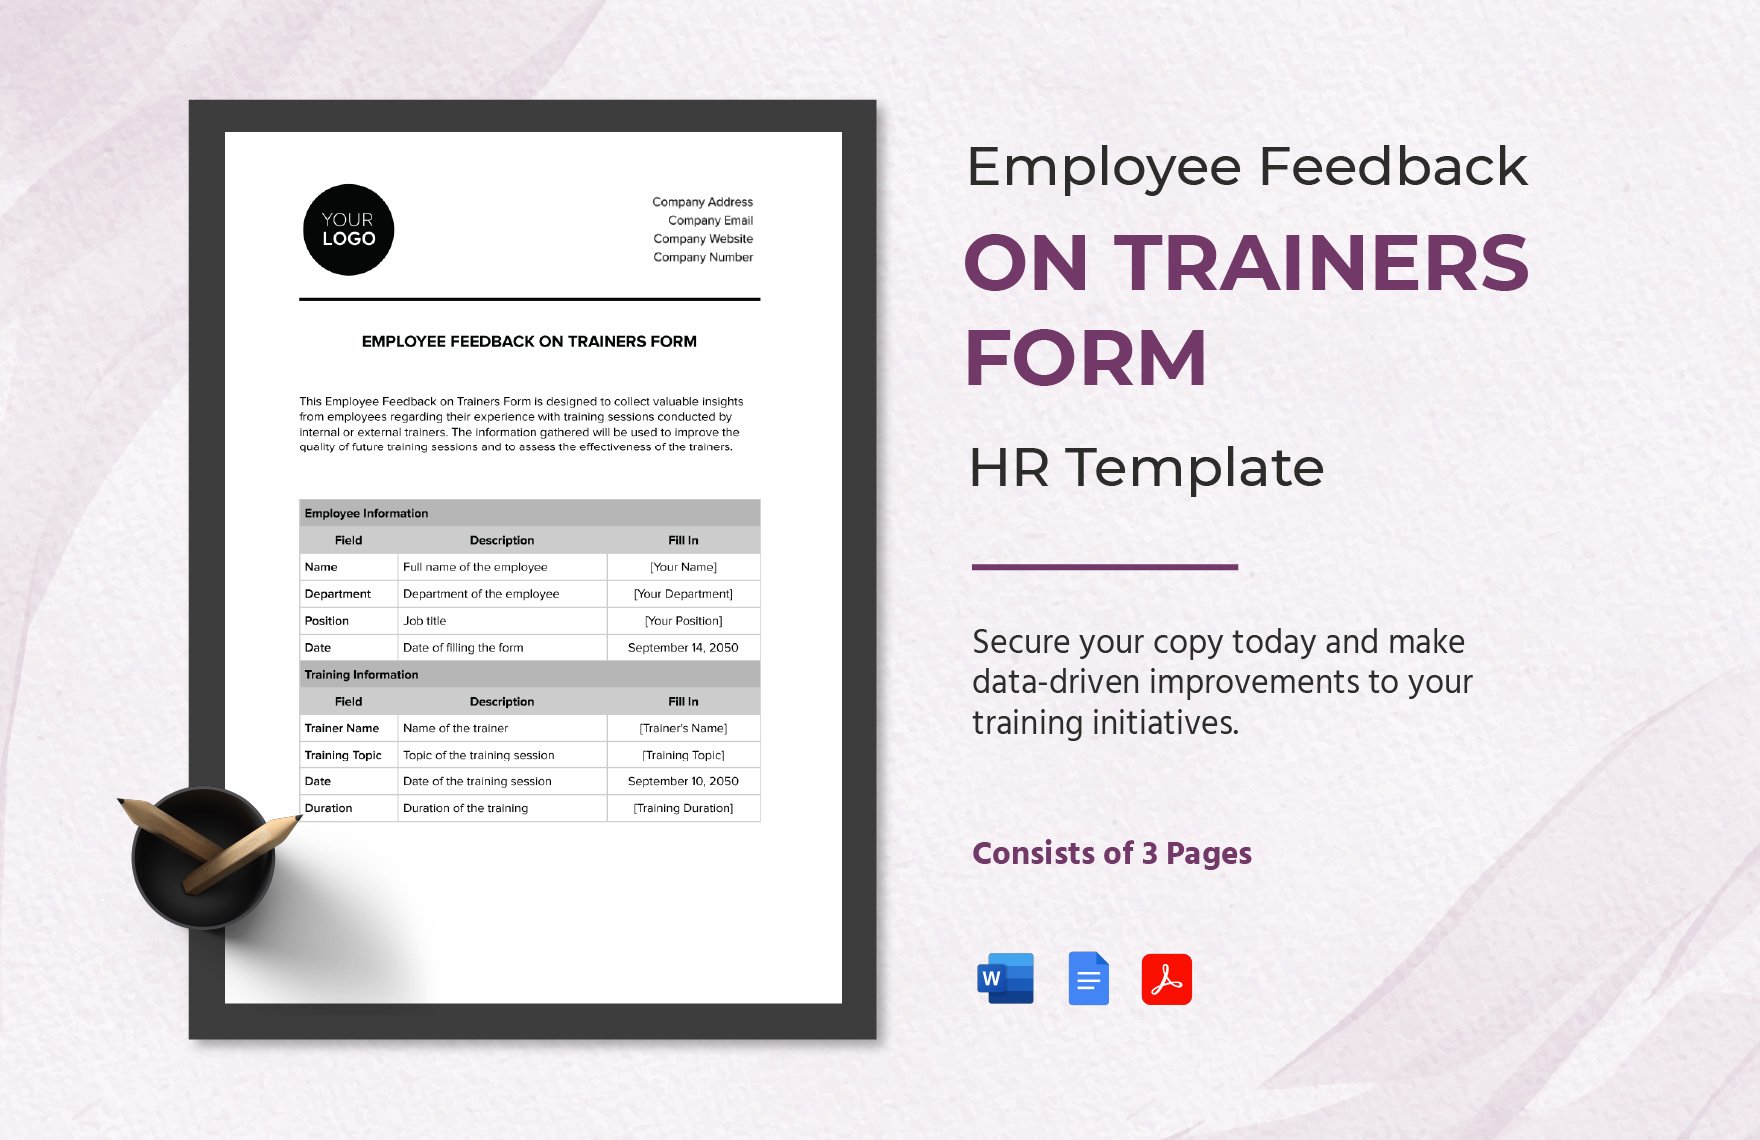 Employee Feedback on Trainers Form HR Template in Word, Google Docs, PDF